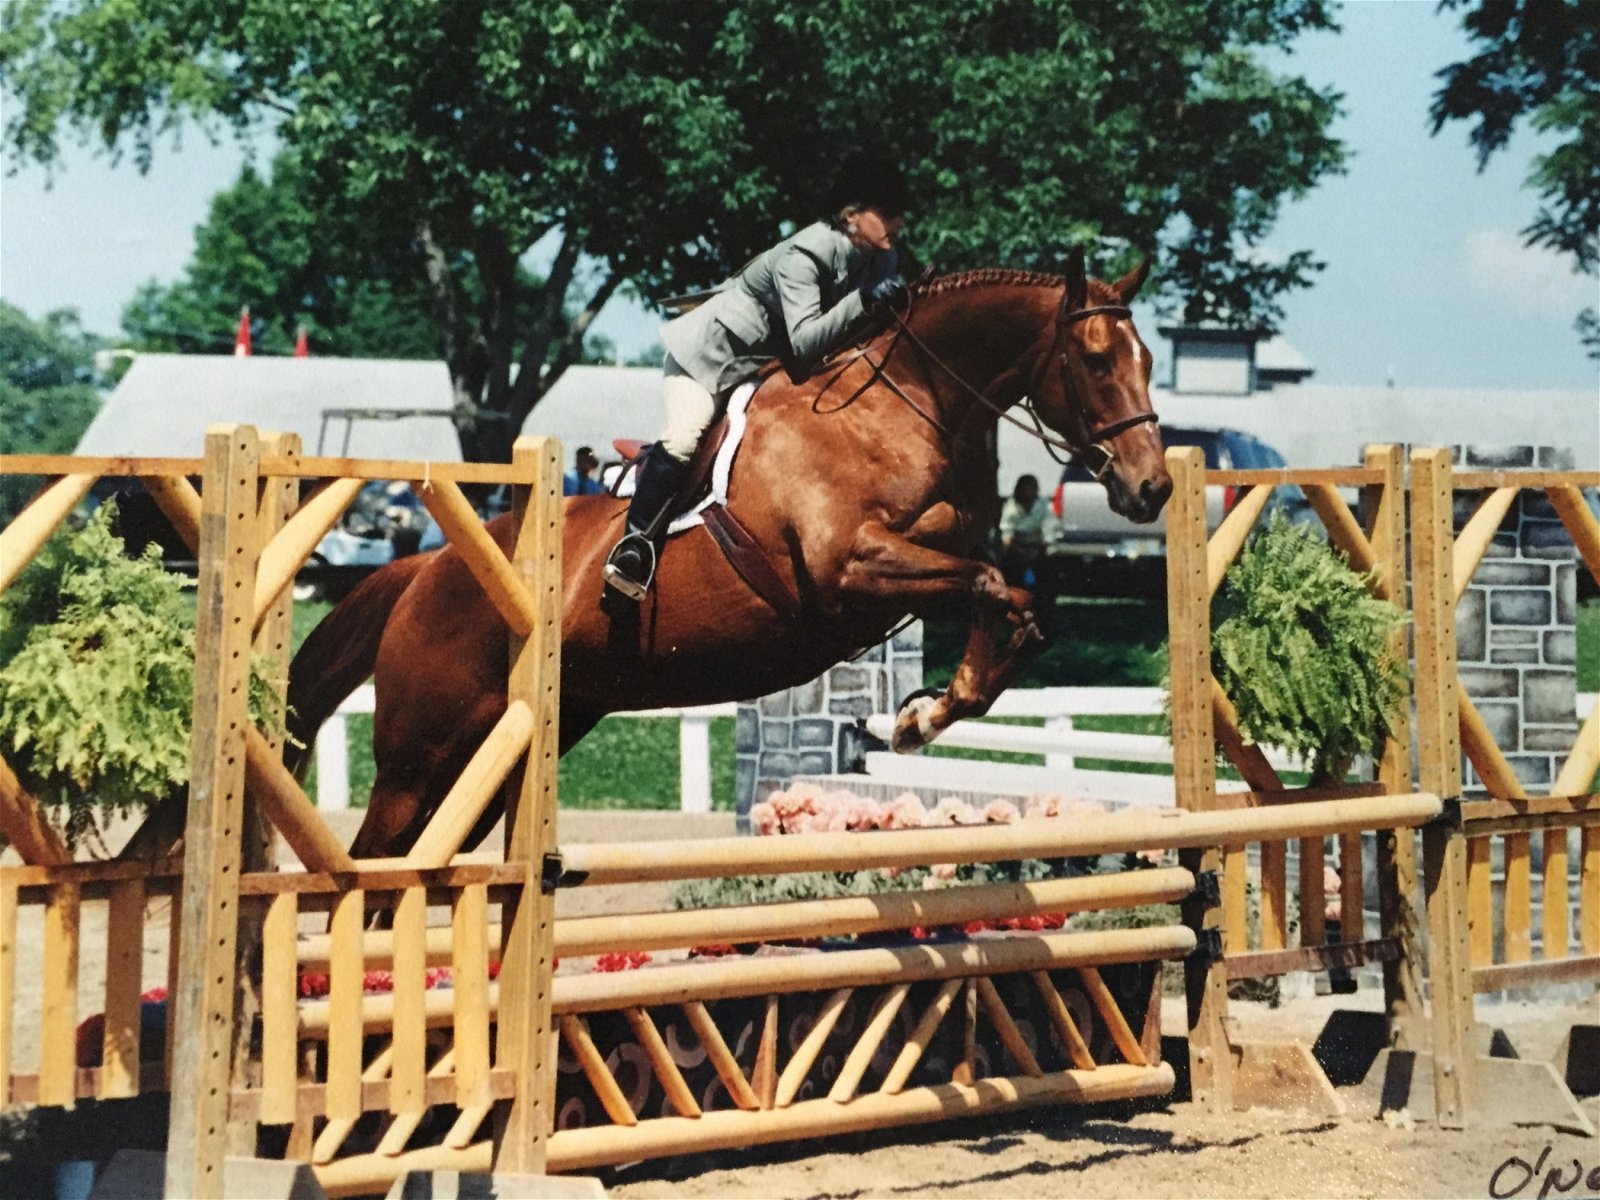 Horse jumping at competition